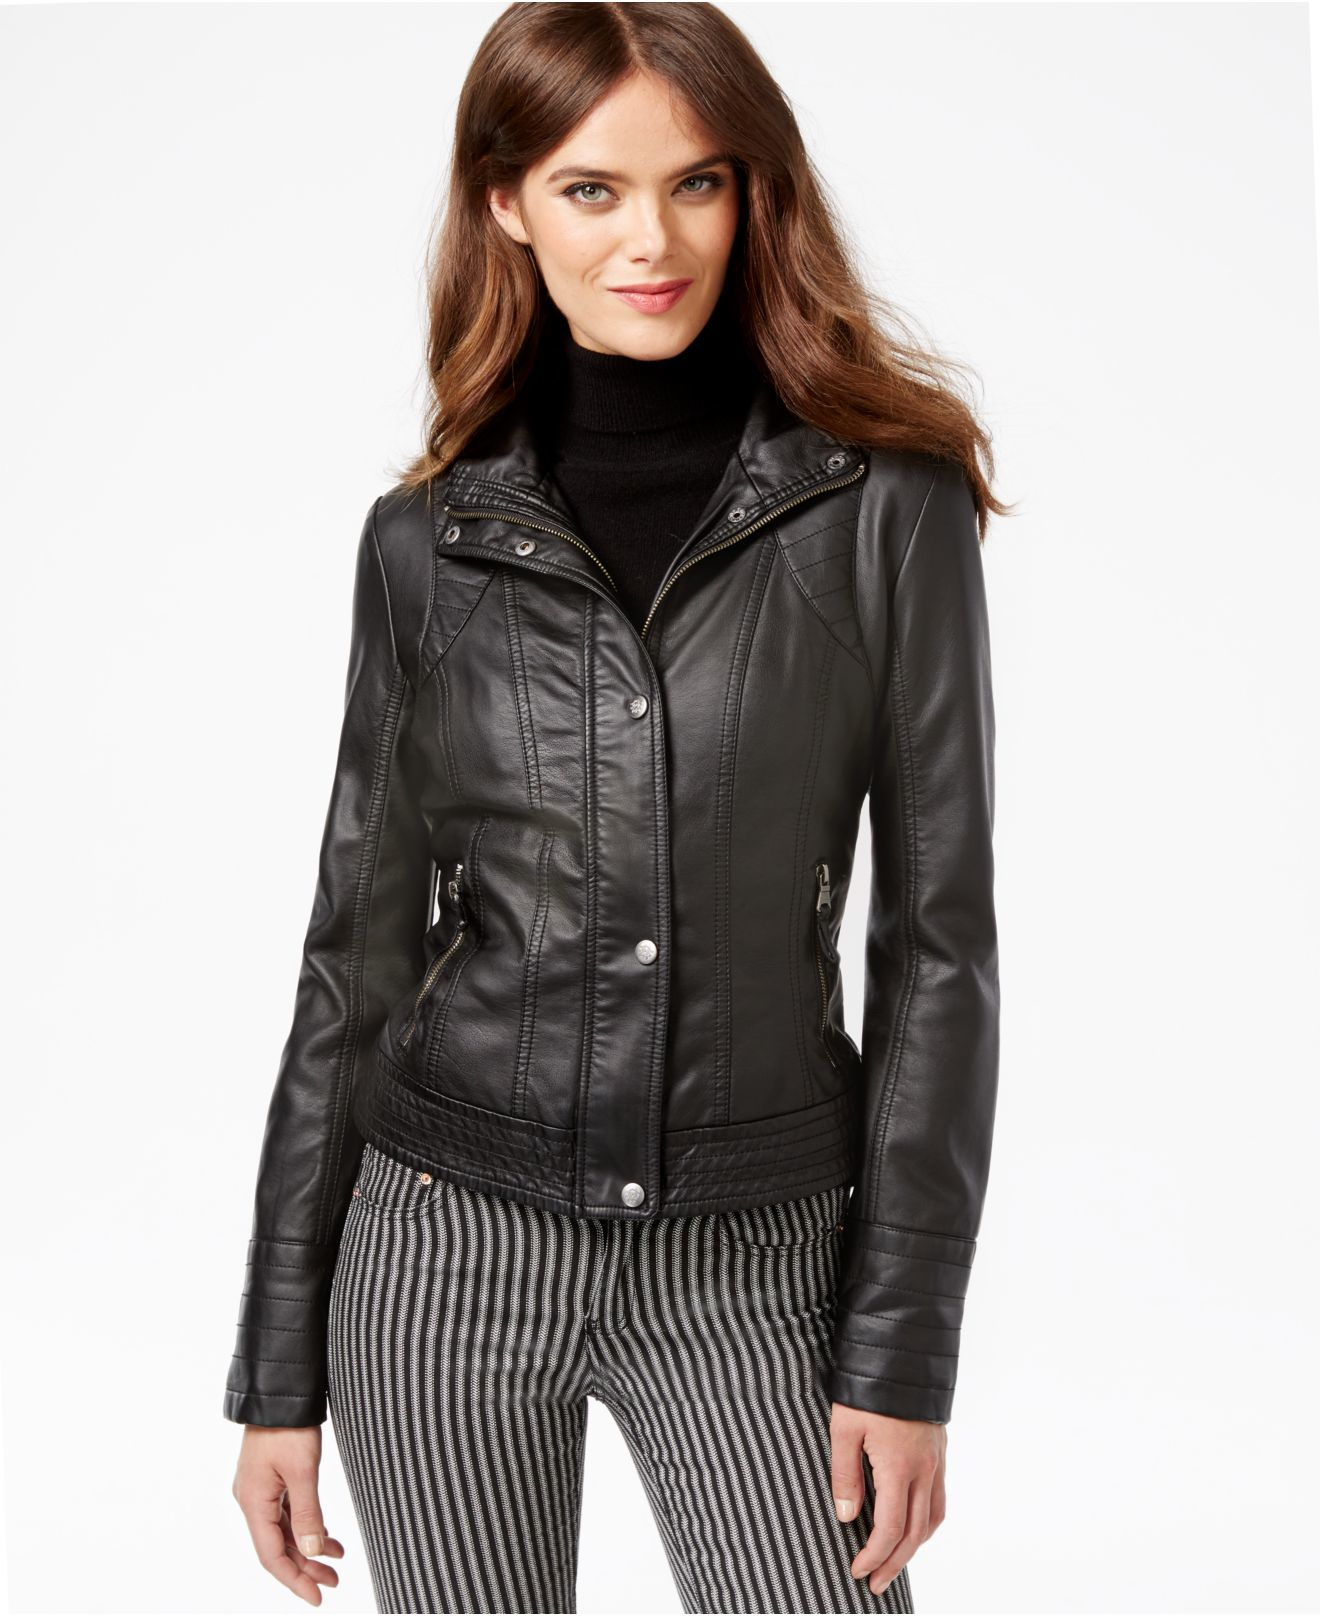 Lyst - Jessica simpson Faux-leather Moto Jacket in Black